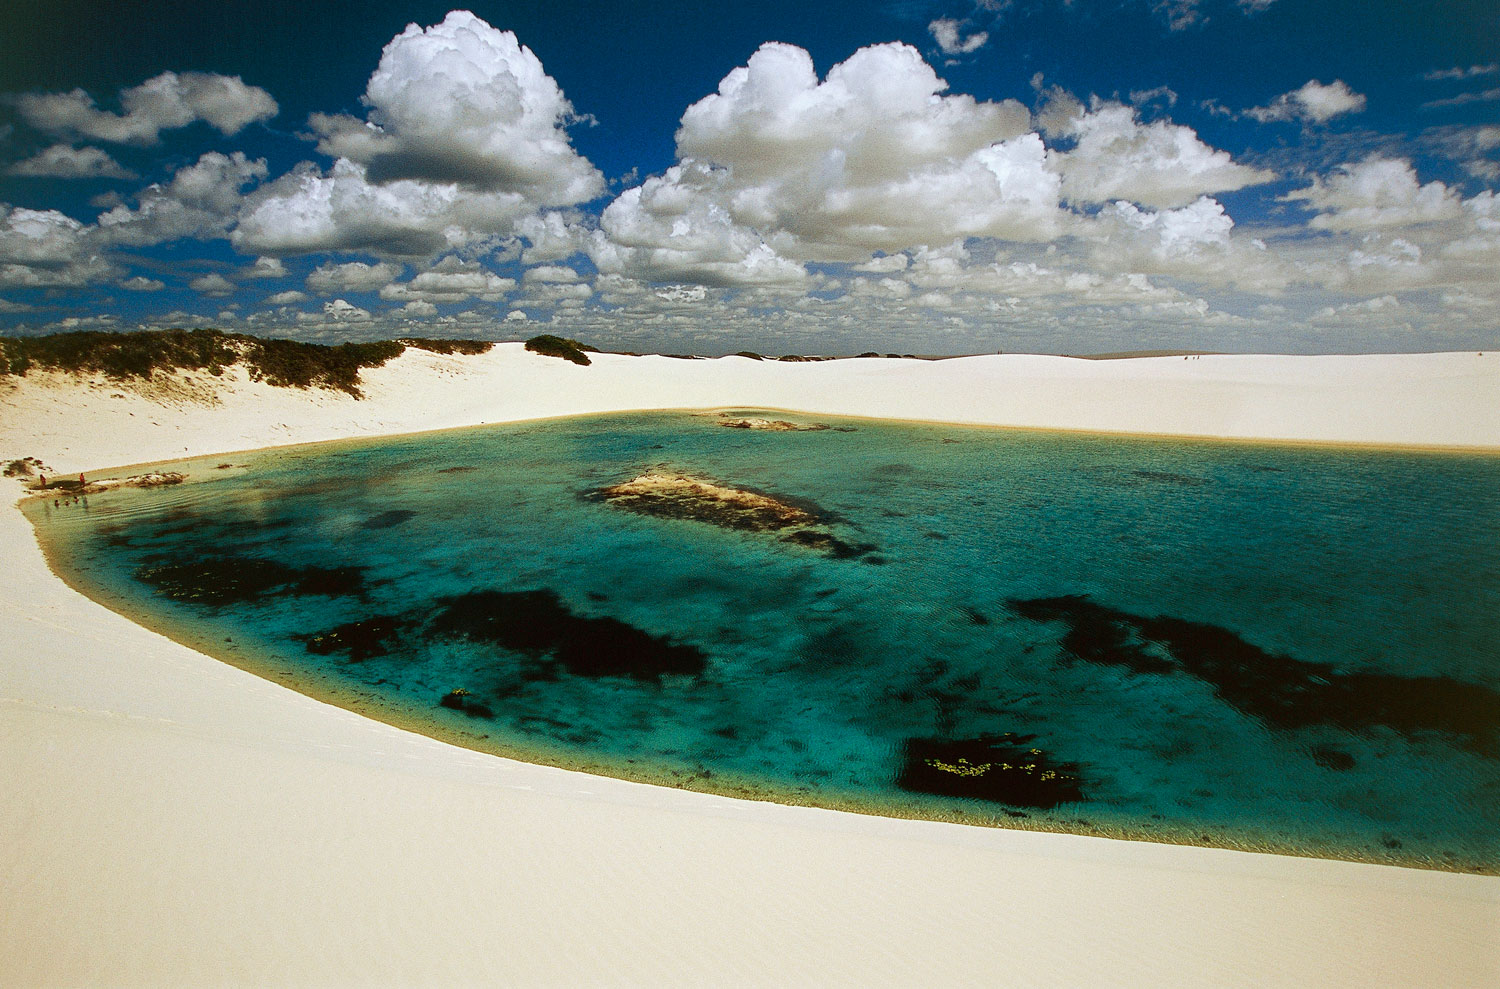 The Lencois Maranhenses National Park received its Portuguese name, meaning “the bedsheets of Maranhao,” from its famous white sand dunes, but the region keeps a bit of color thanks to the blue waters in between the dunes and the beautiful tropical fish that swim there.